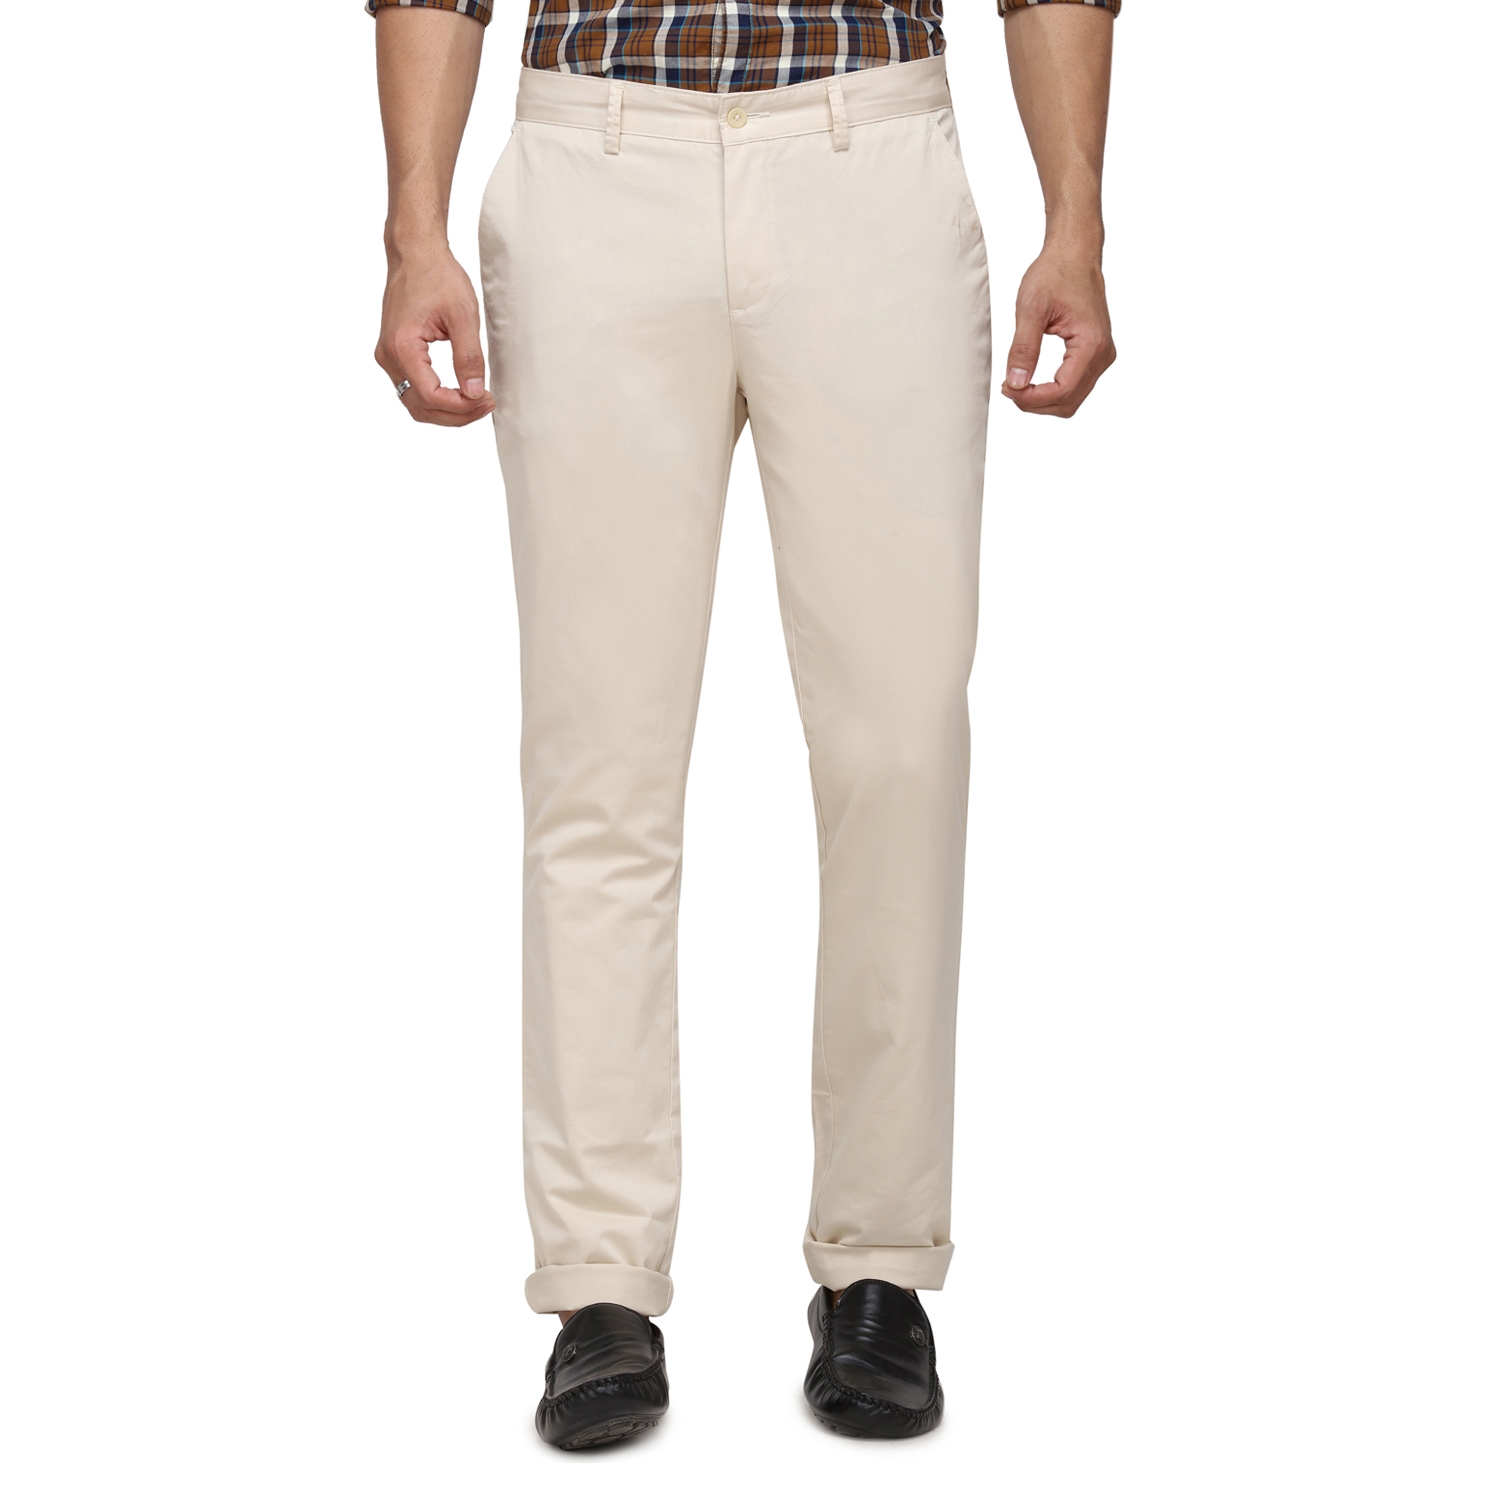 Greenfibre | Khaki Checked Super Slim Fit Casual Trouser | Greenfibre 0